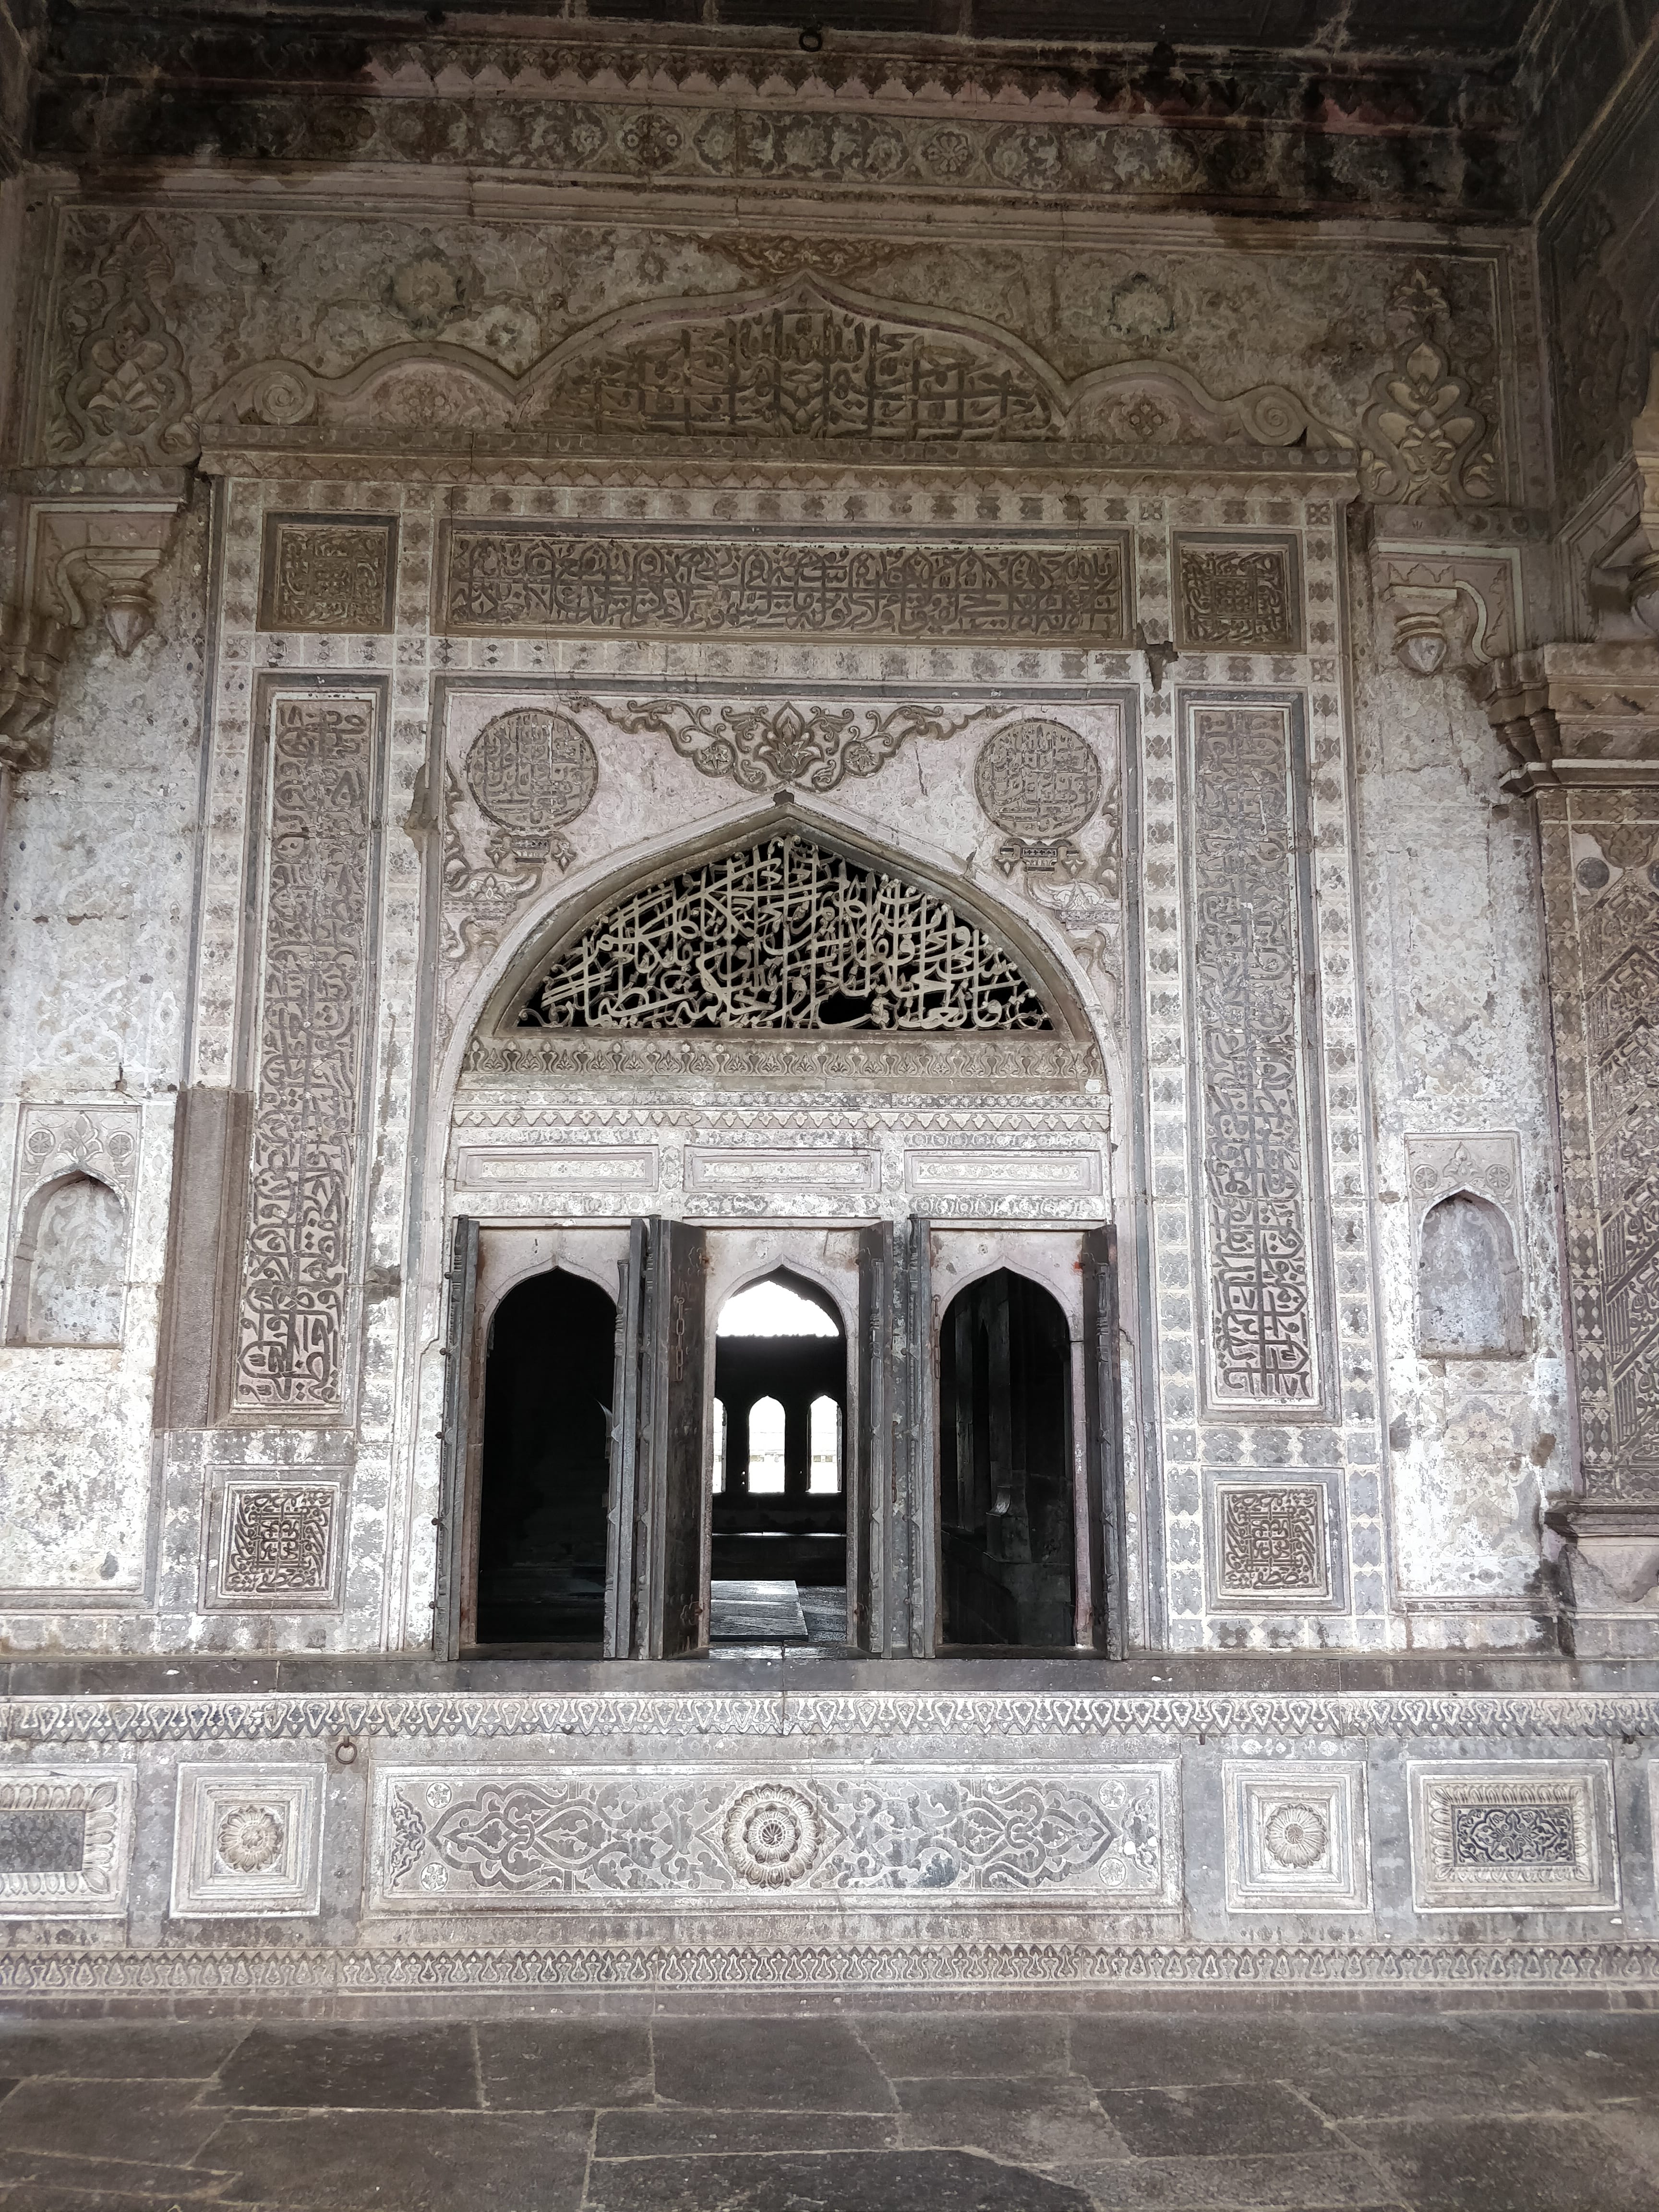 intricate designs on the walls of the tomb